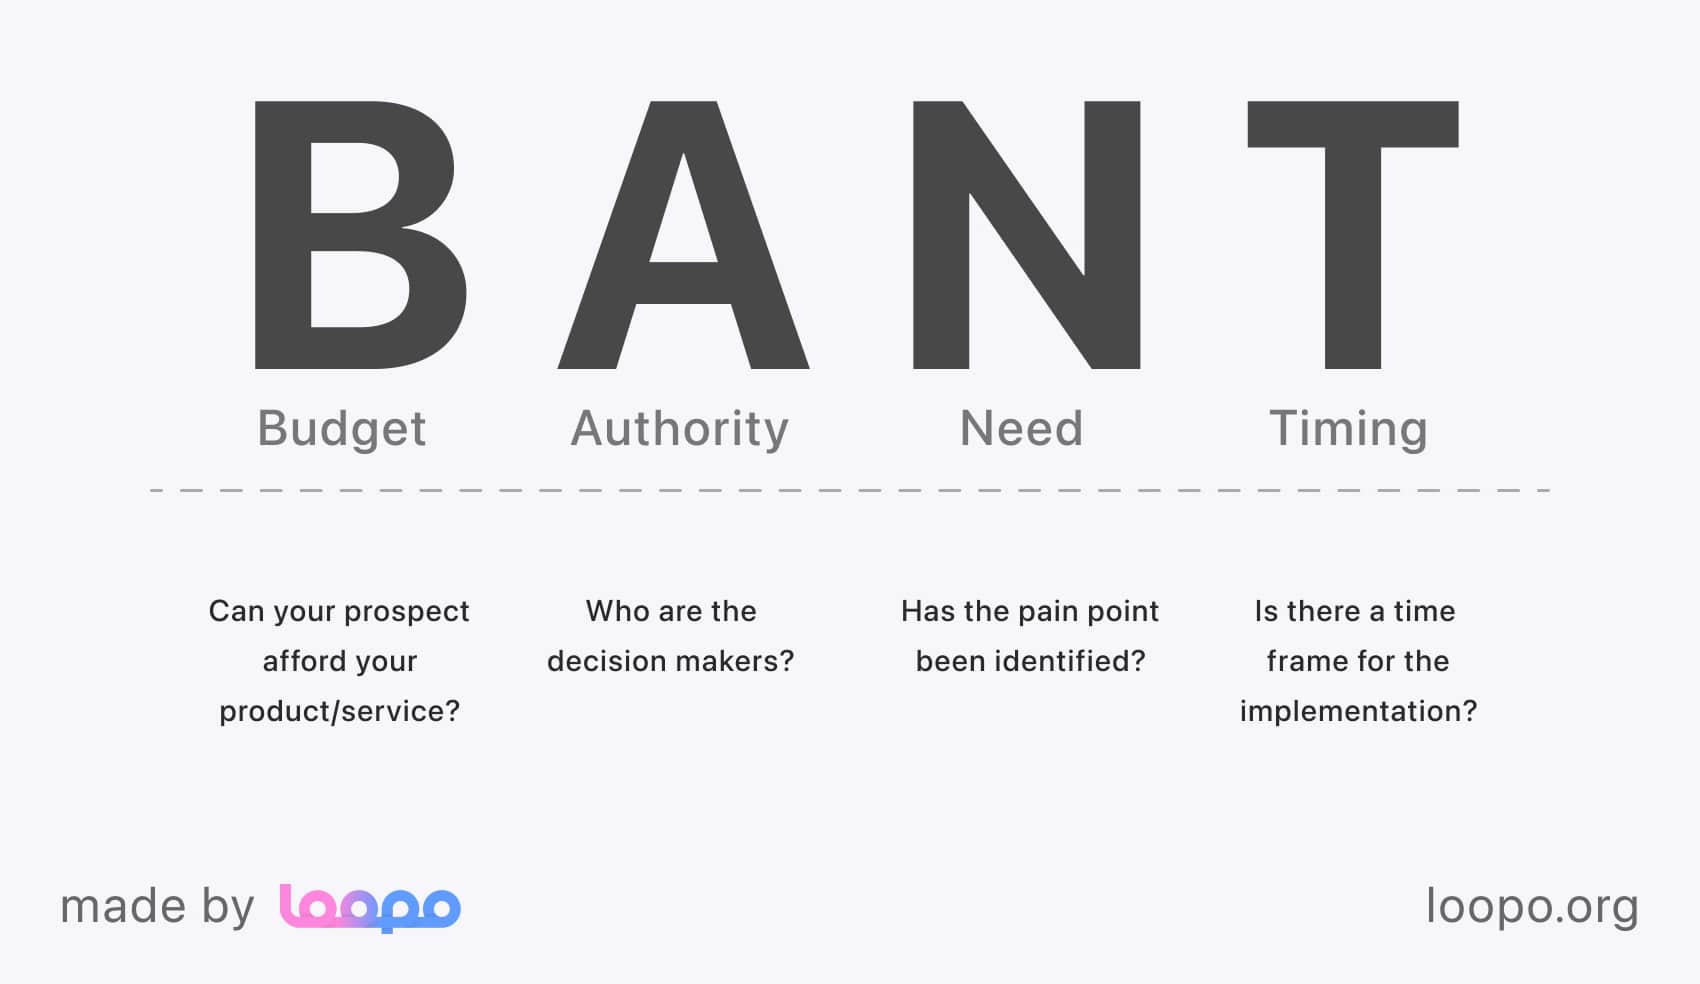 What BANT framework consists of